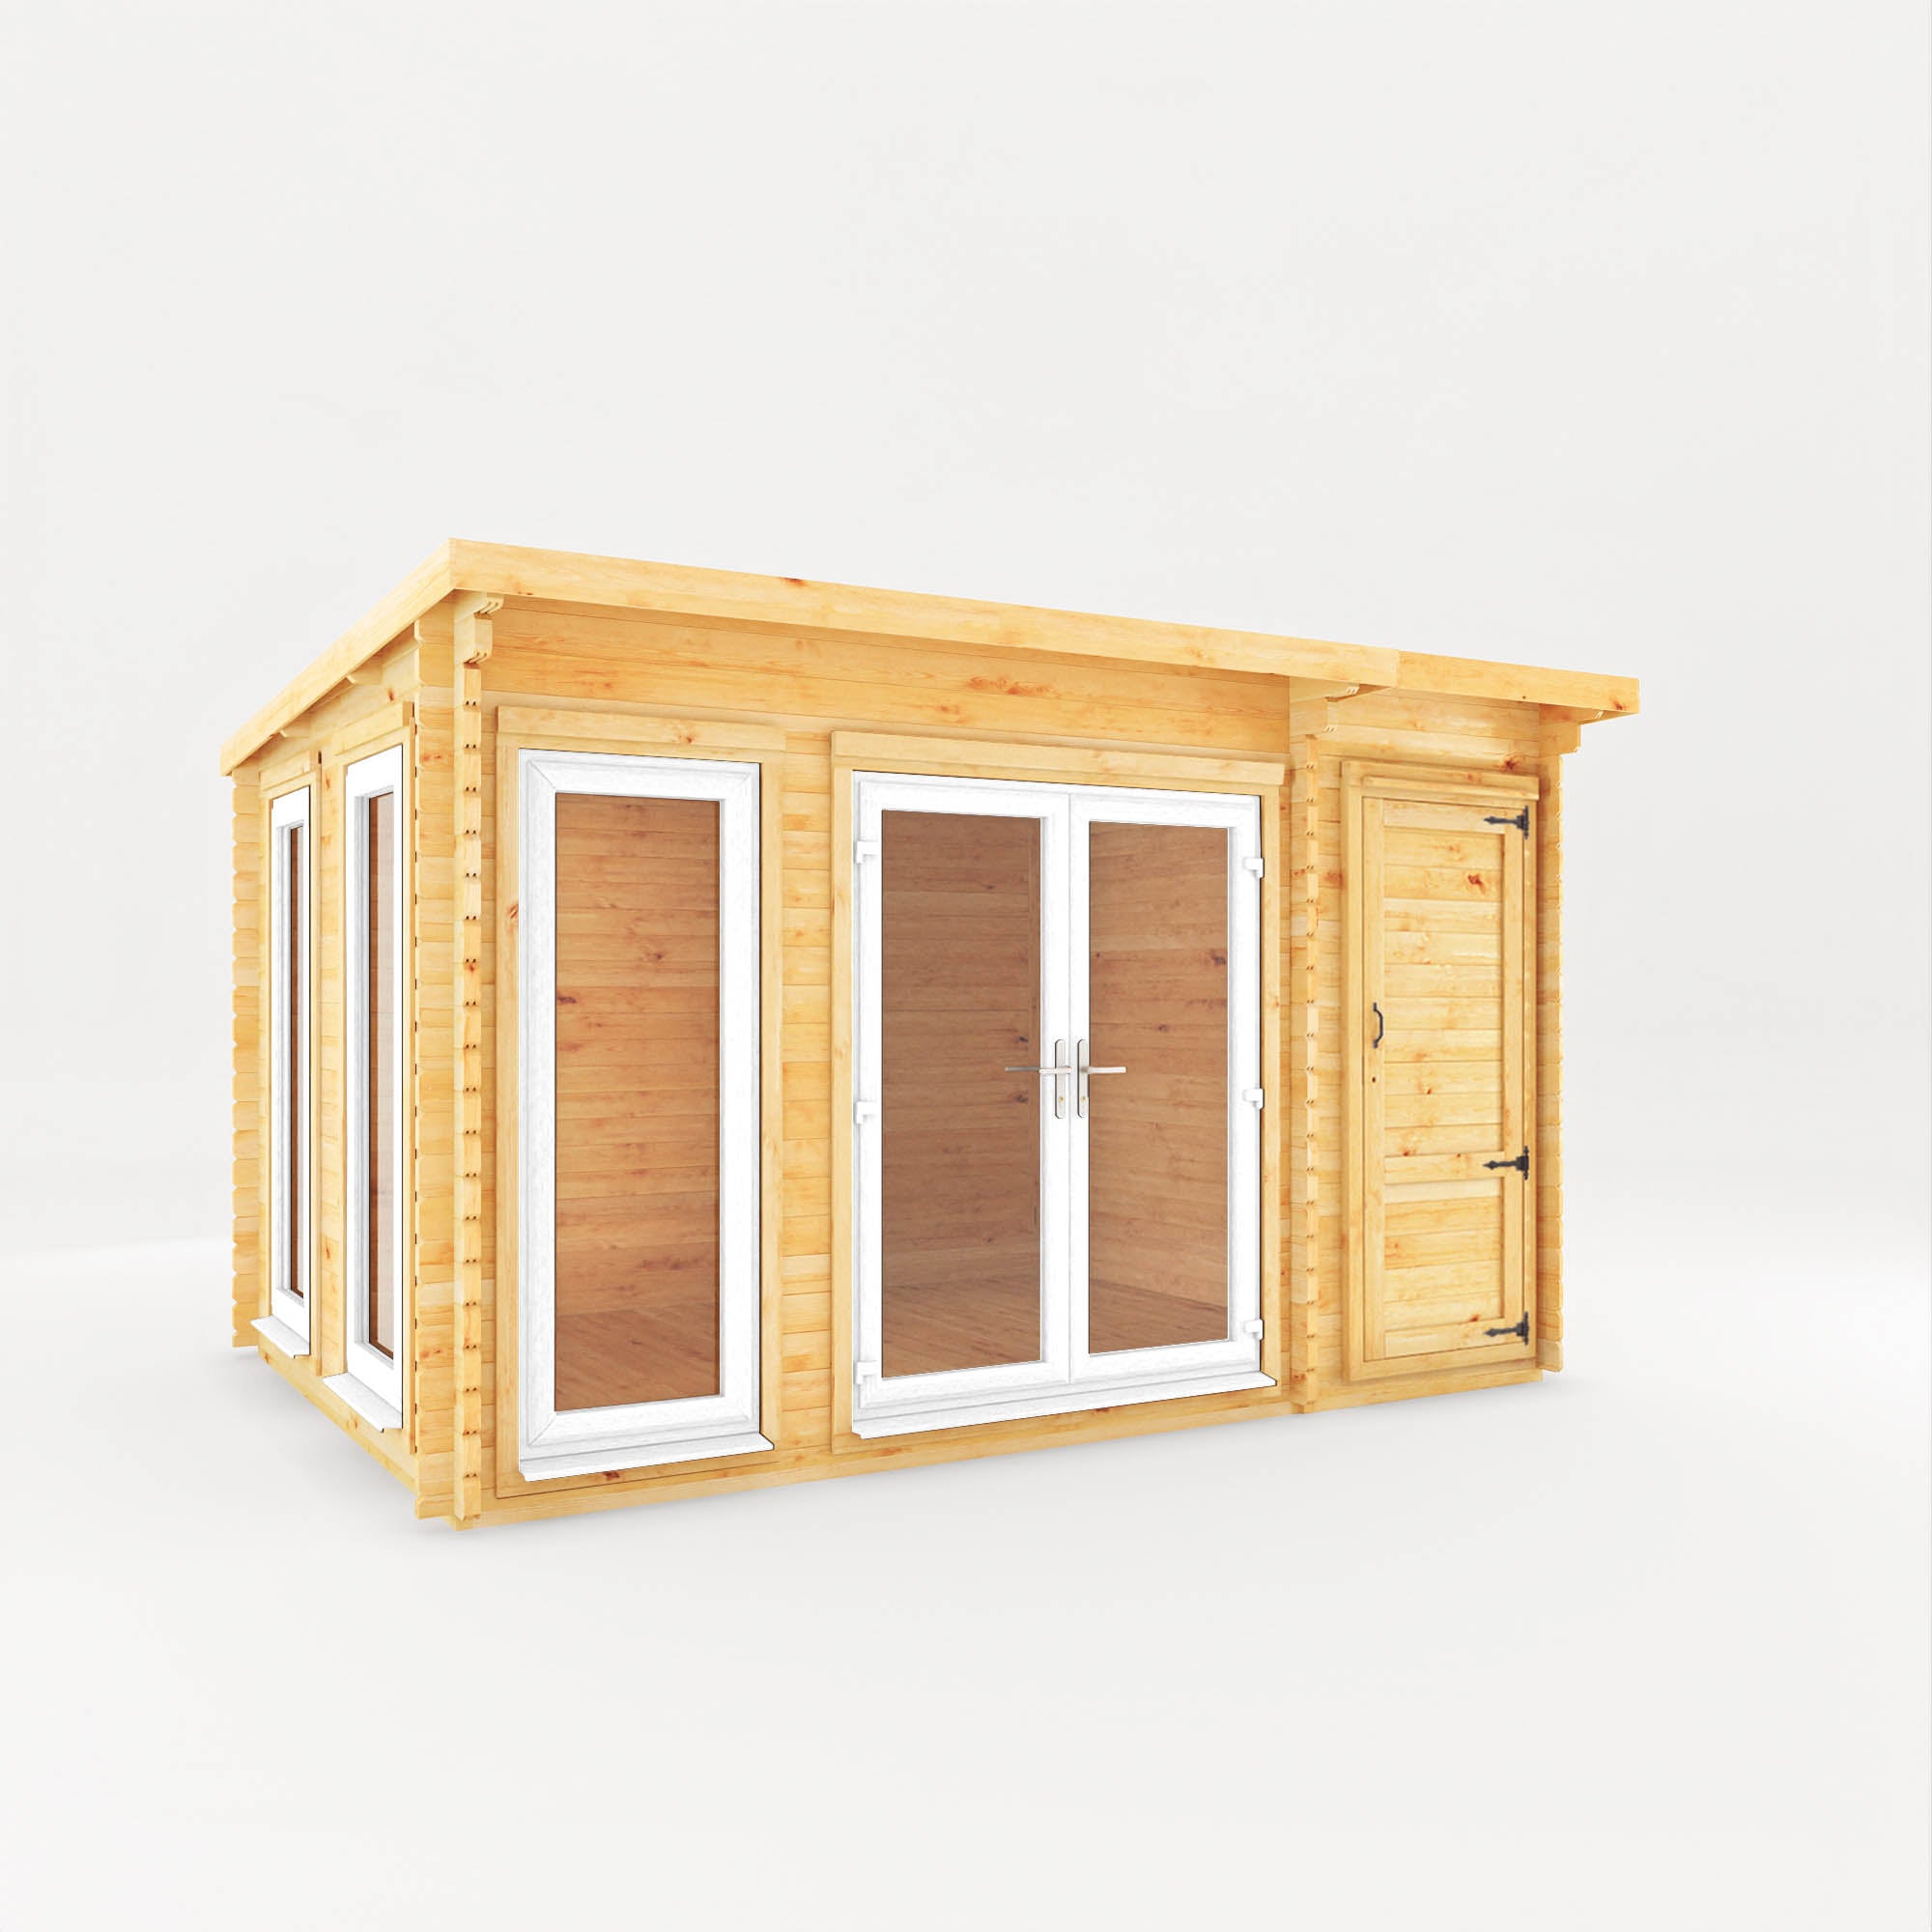 4.1m x 3m Studio Pent Log Cabin with Side Shed - UPVC White